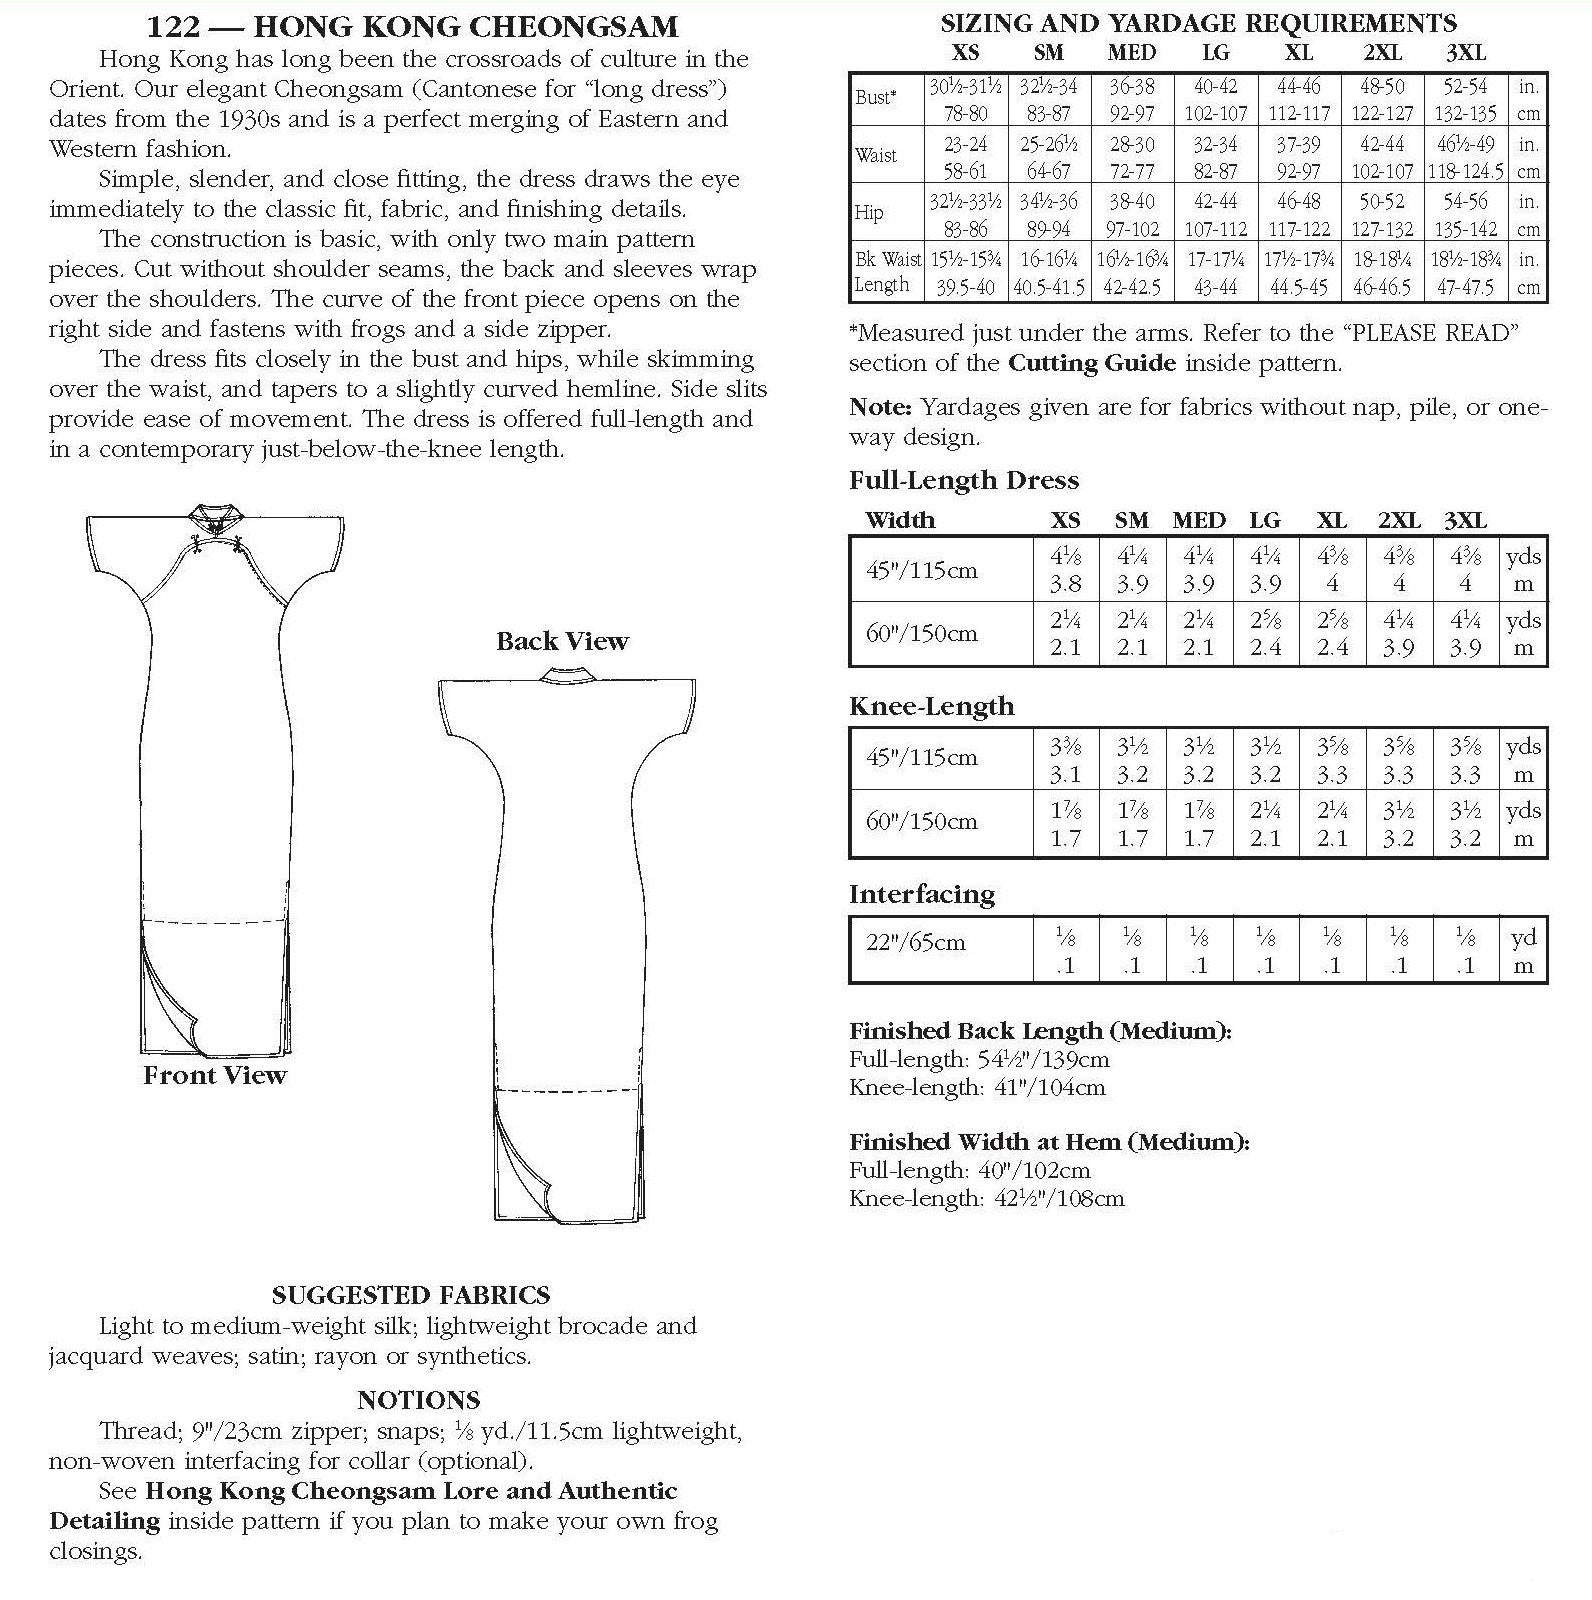 Photo of back cover of 122. Shows all views, descriptions, size and yardage chart, and fabric suggestions.